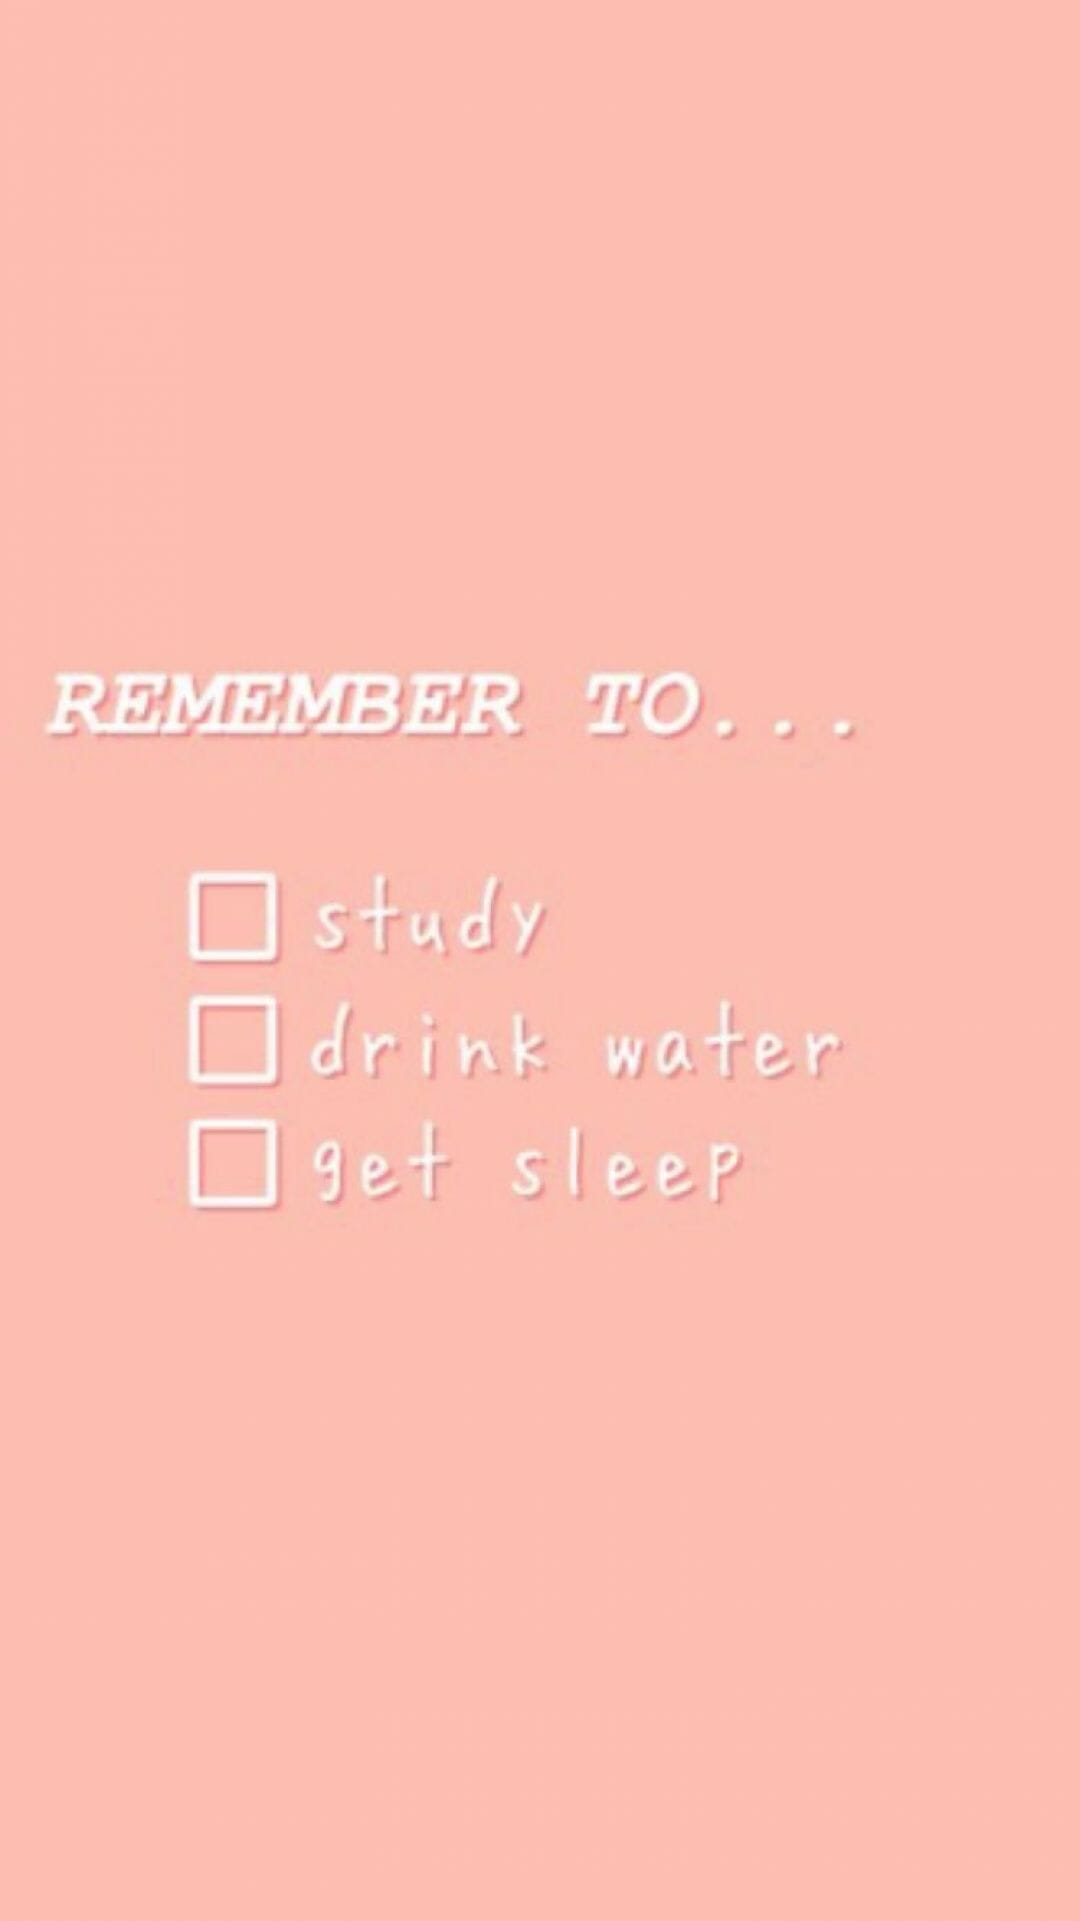 Remember to study, drink water, and get sleep. - Motivational, study, inspirational